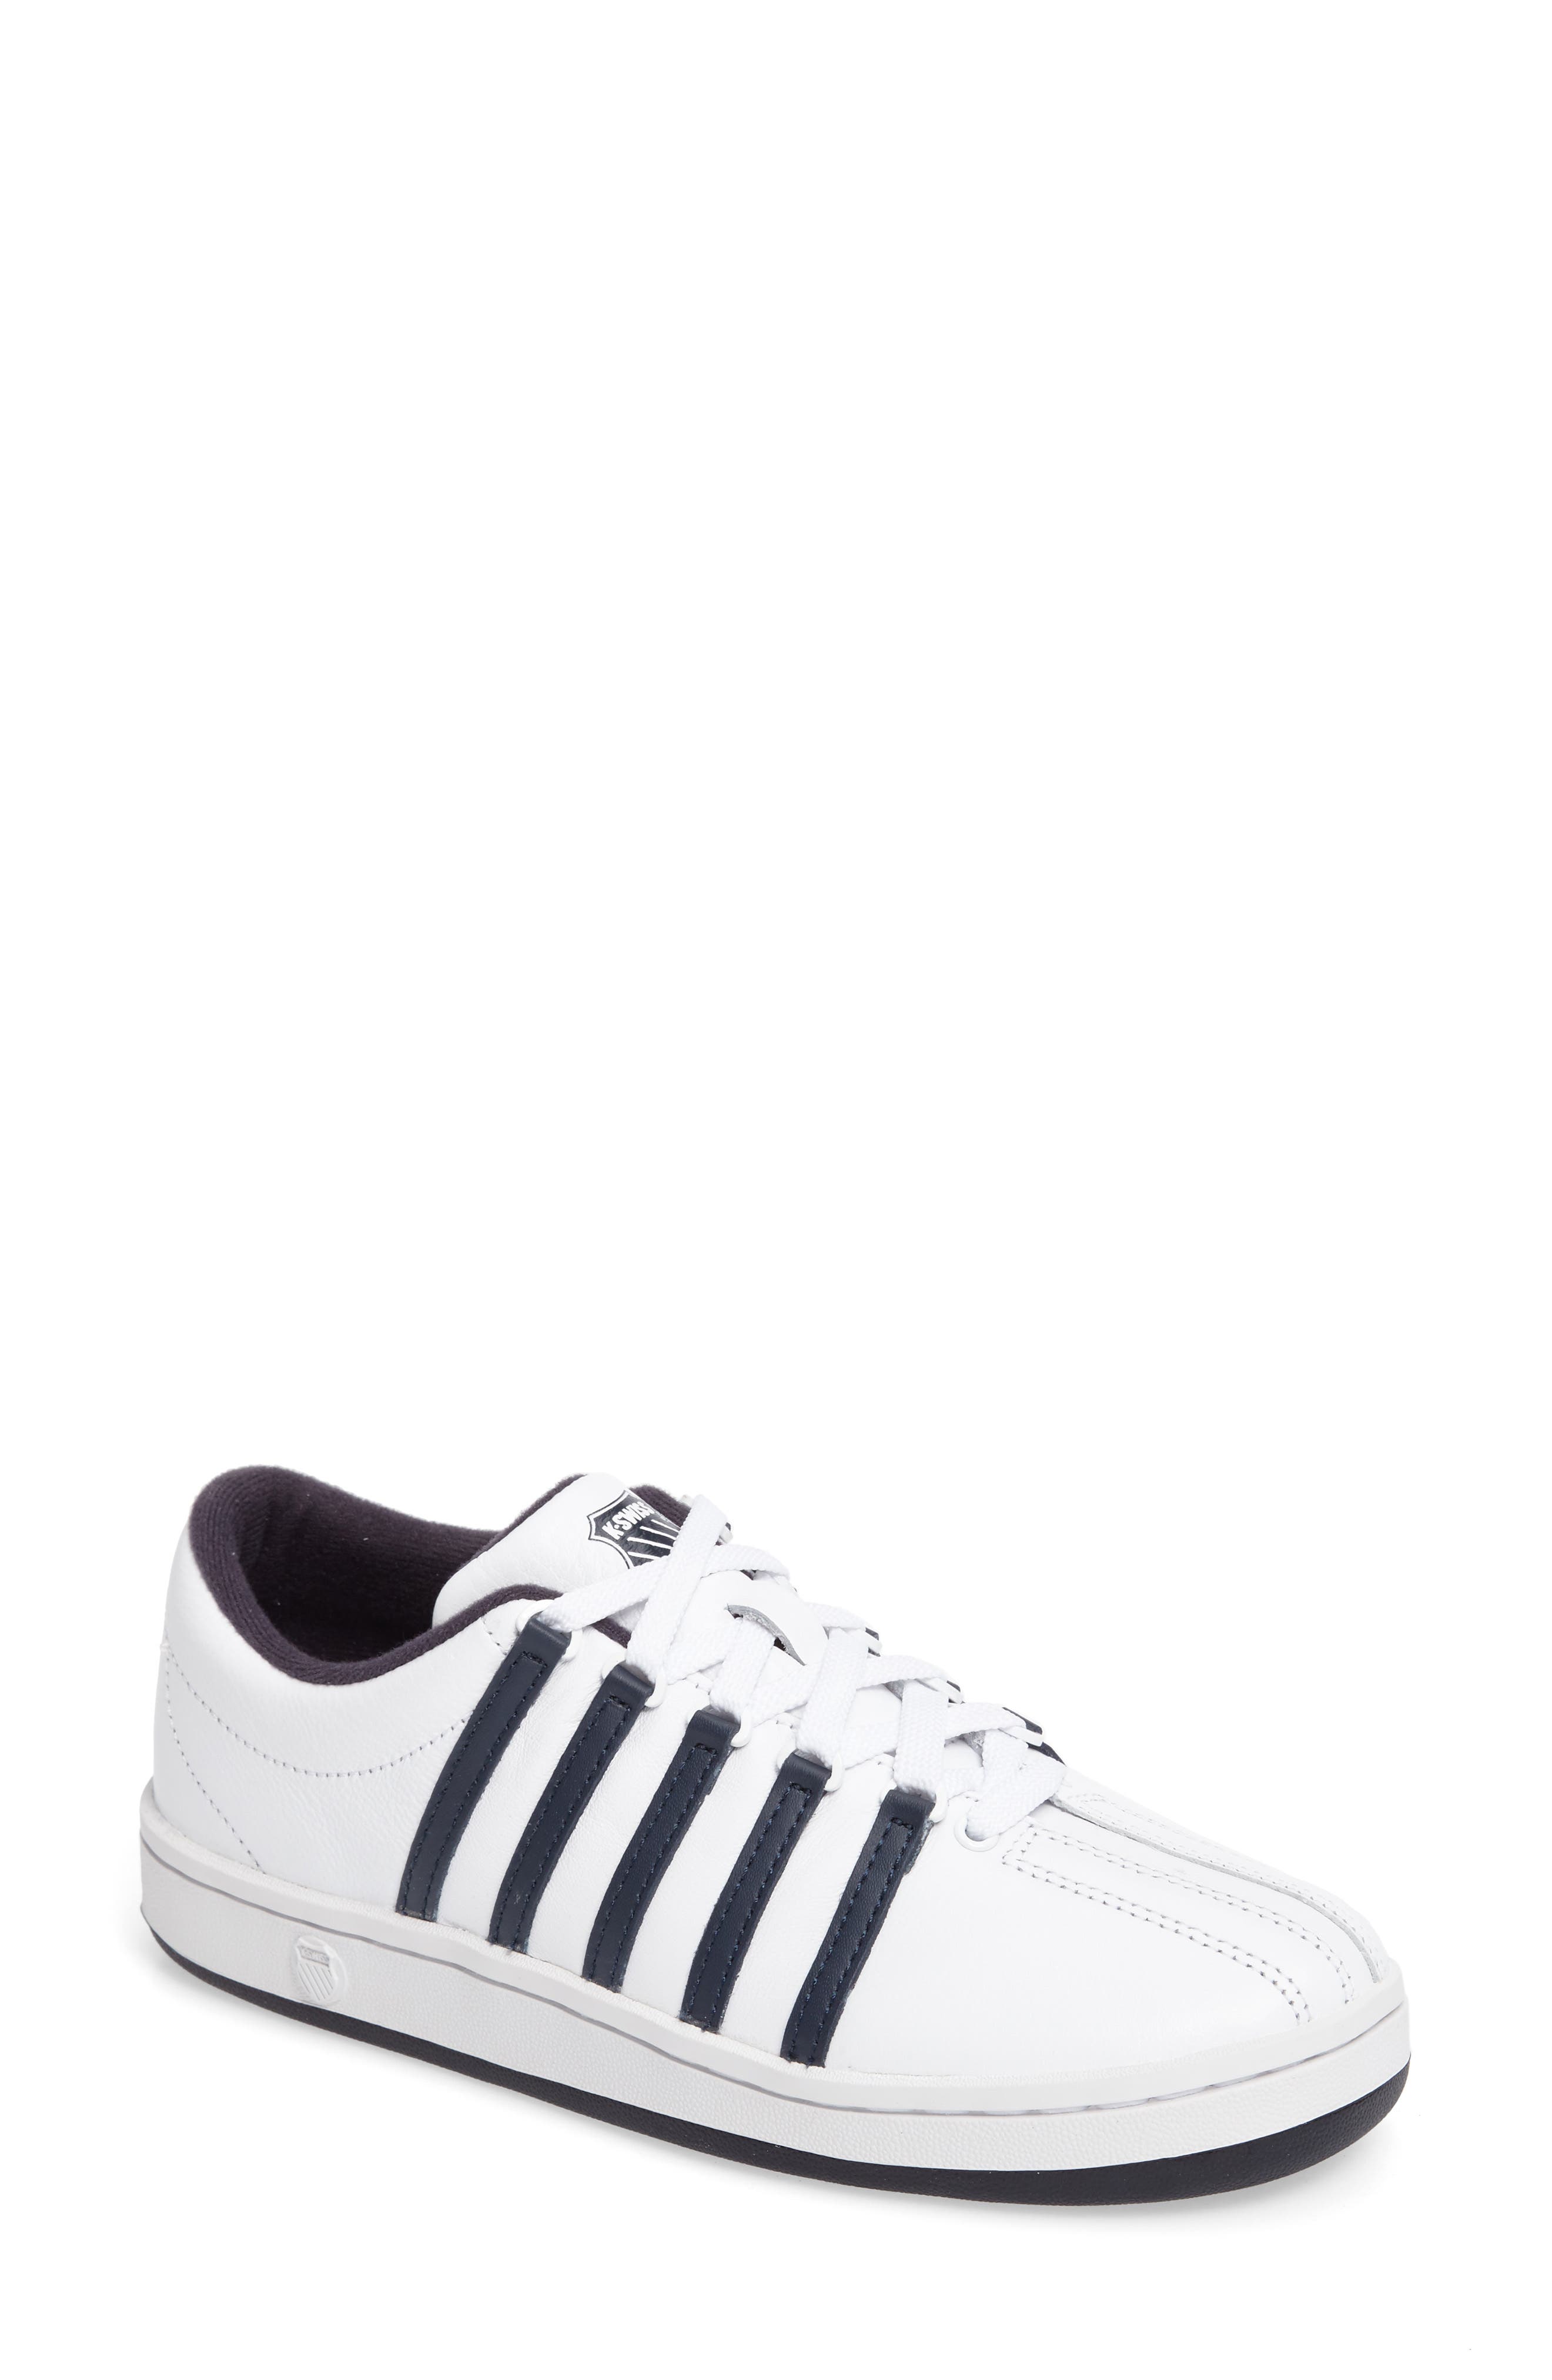 black and white k swiss shoes